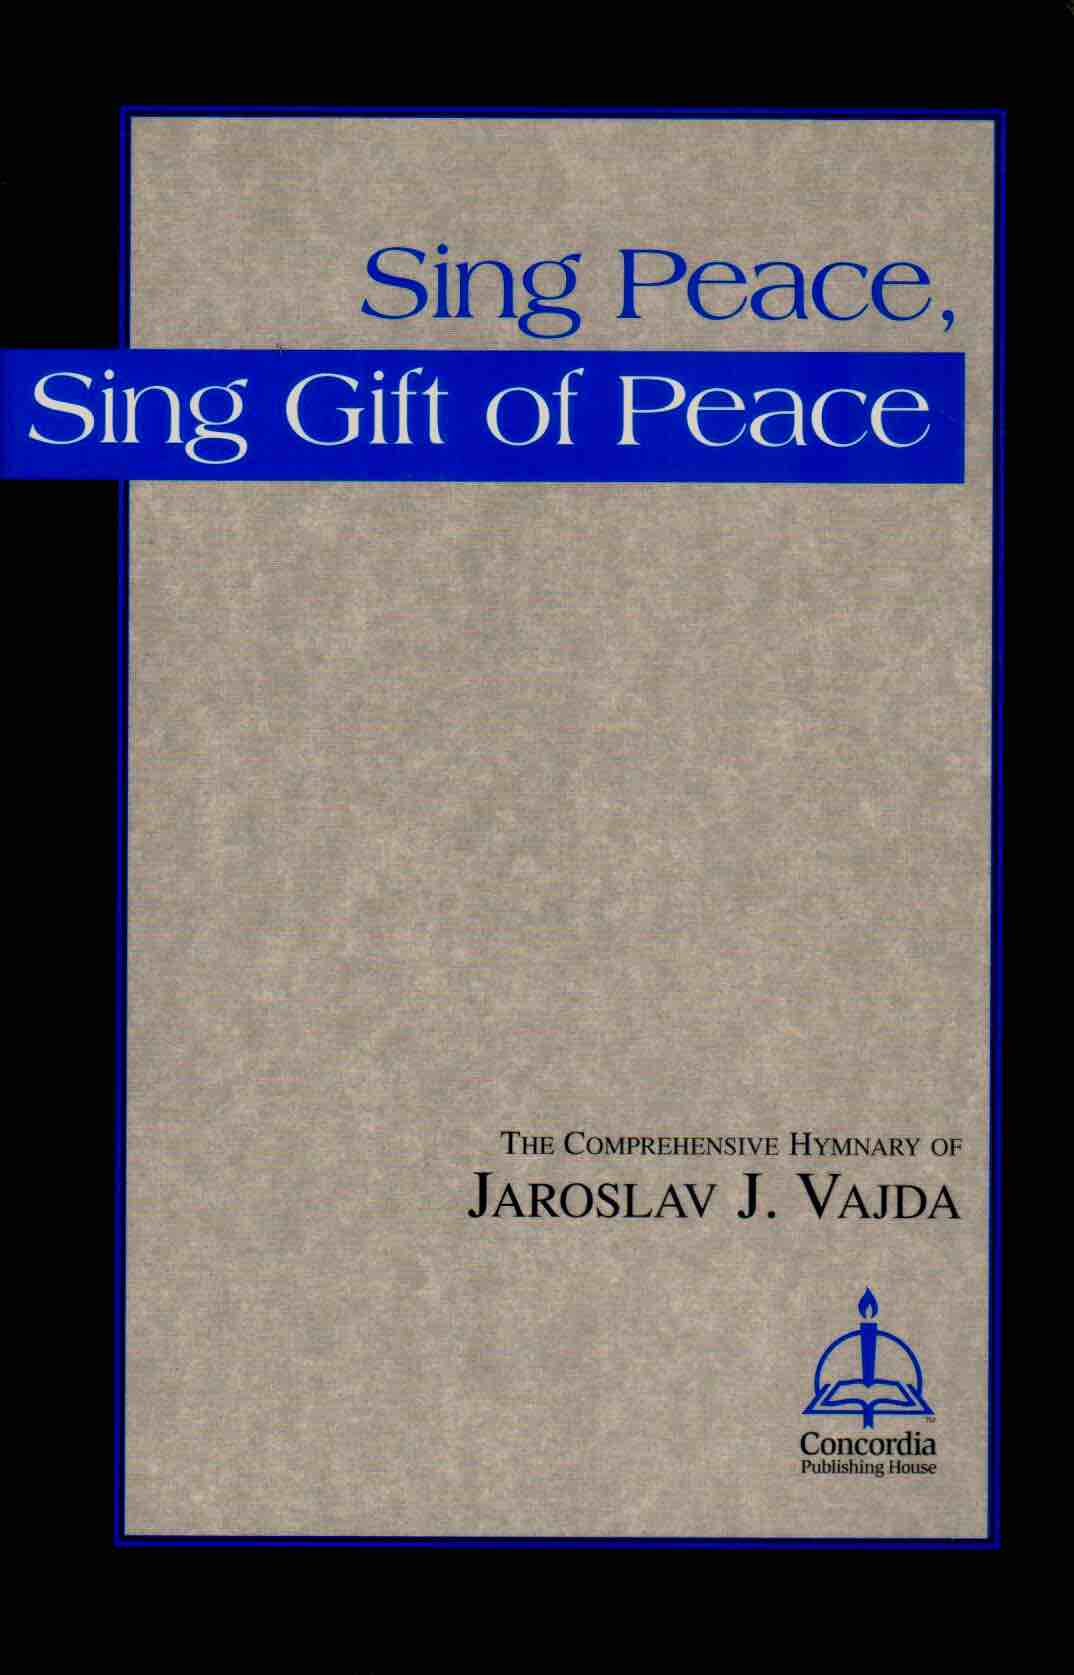 Cover of Sing Peace, Sing Gift of Peace